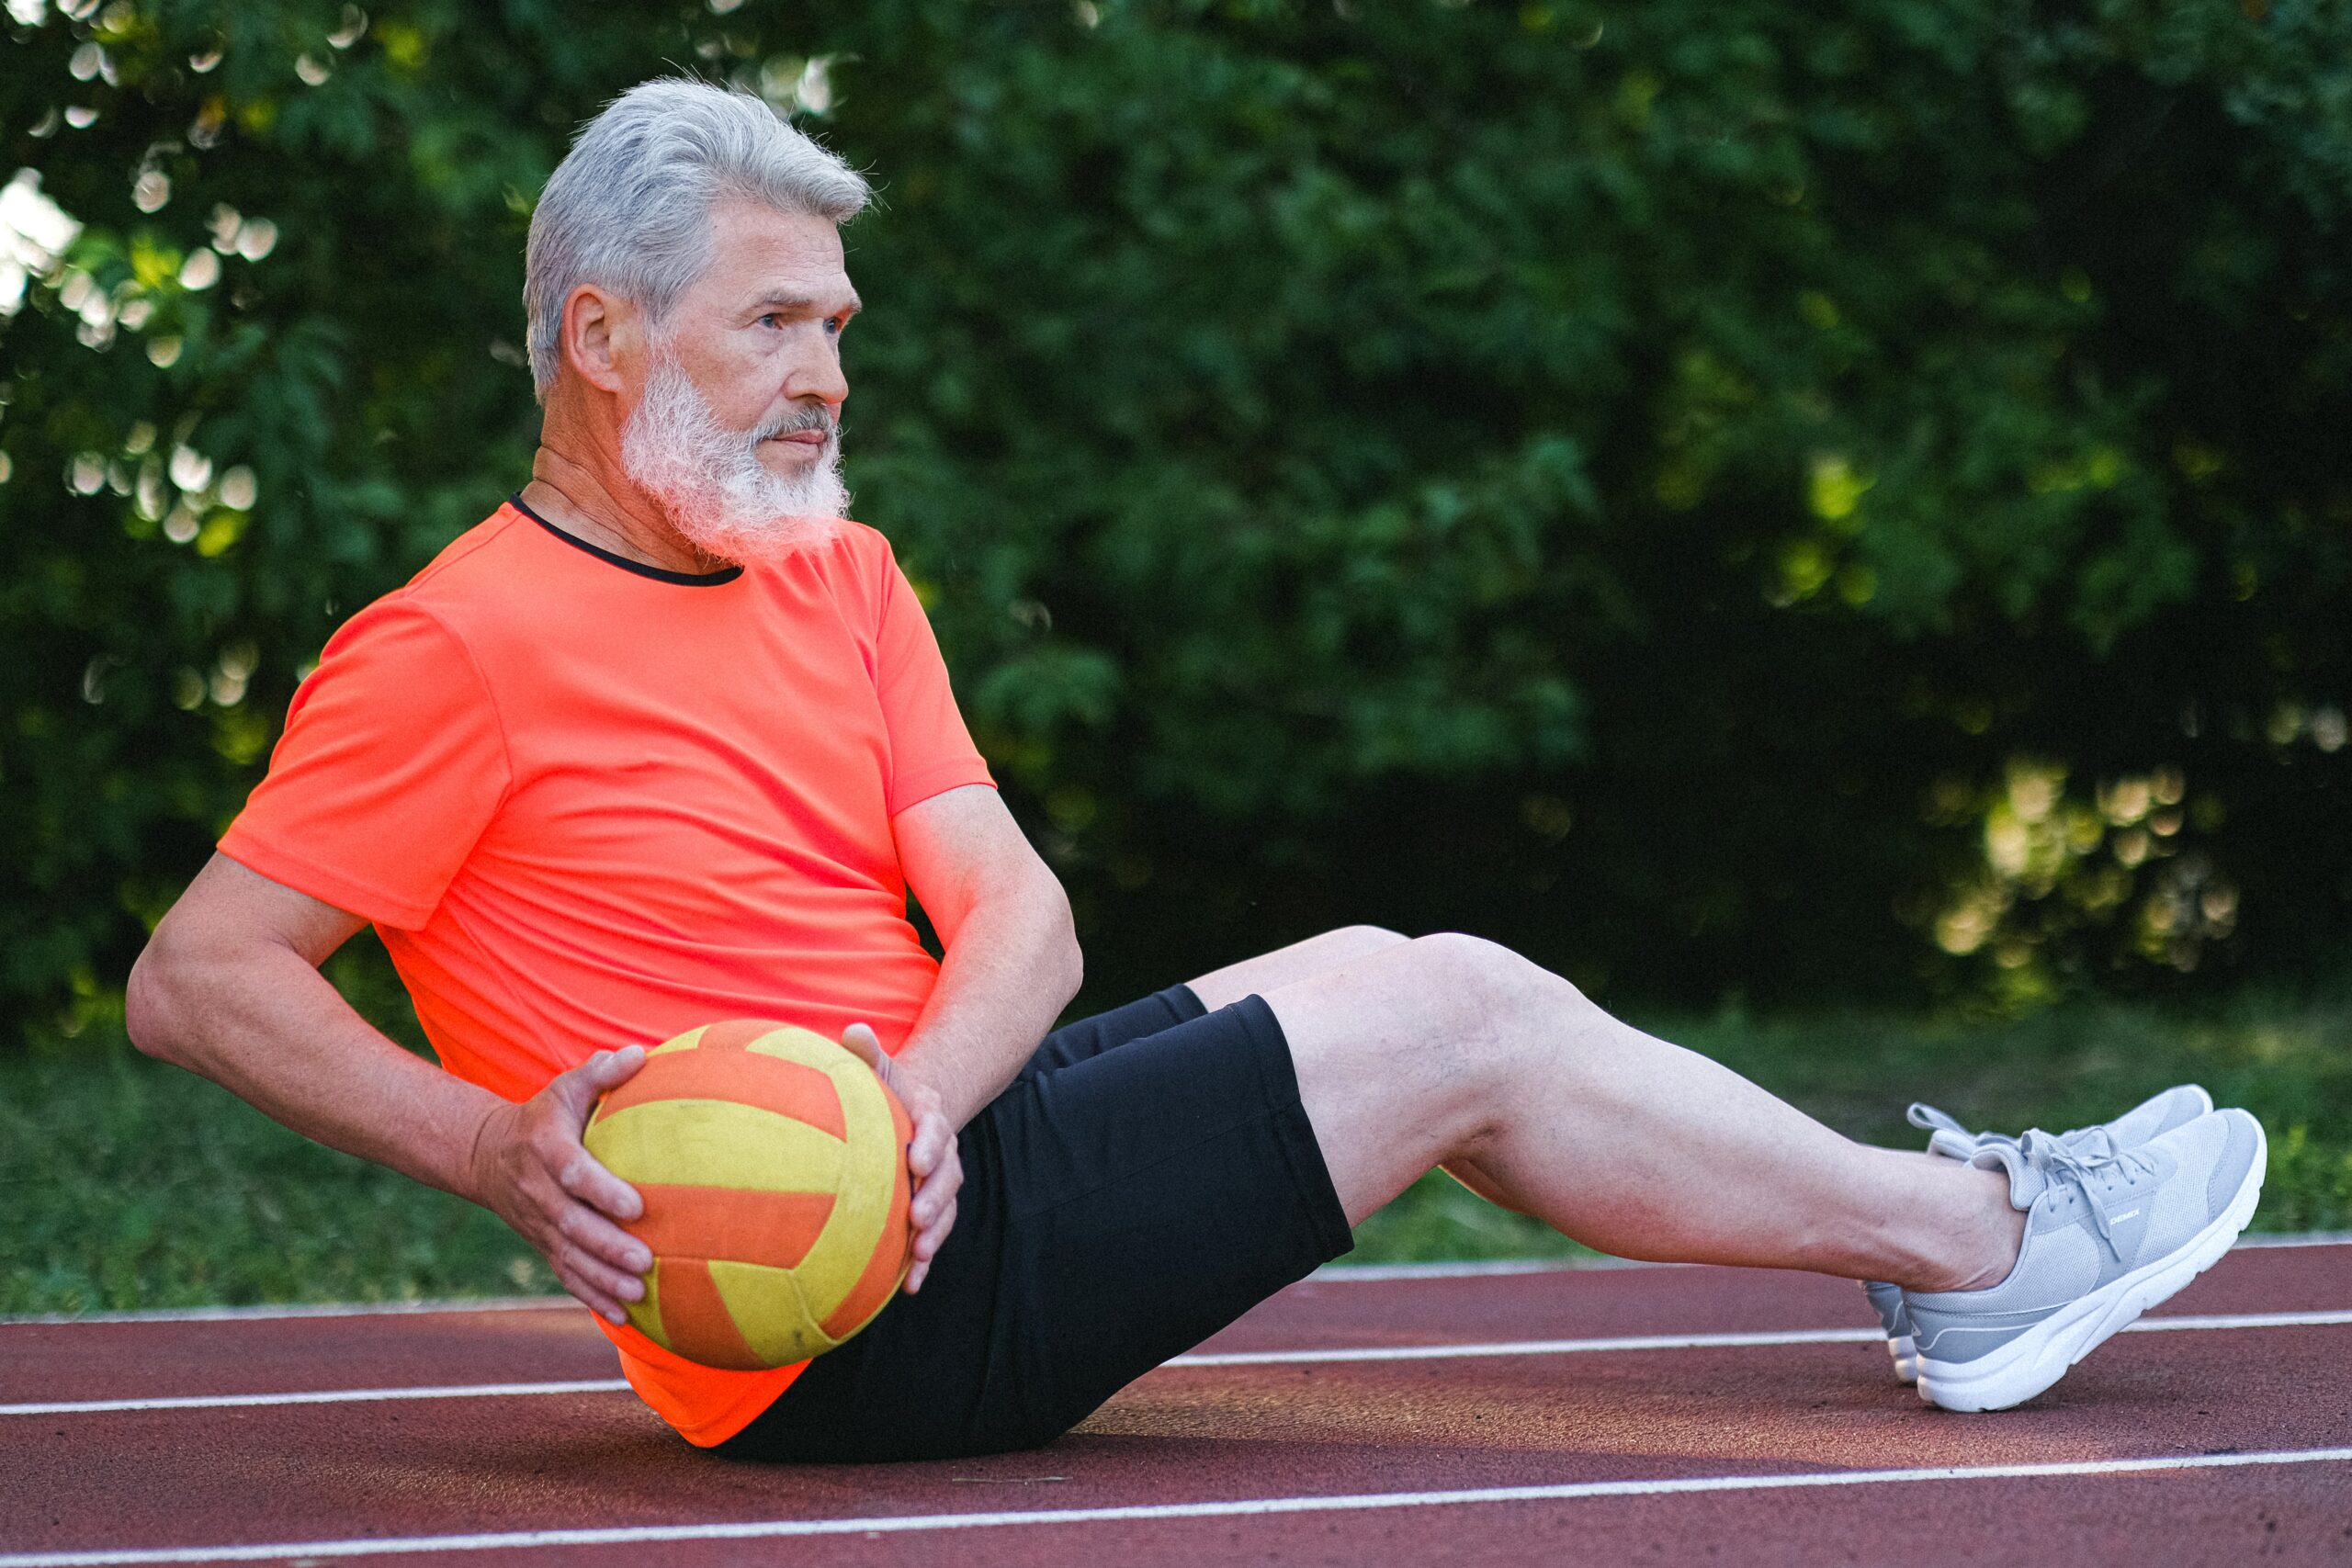 Are HASfit Workouts Safe and Effective For Seniors? A Physical Therapist Weighs In